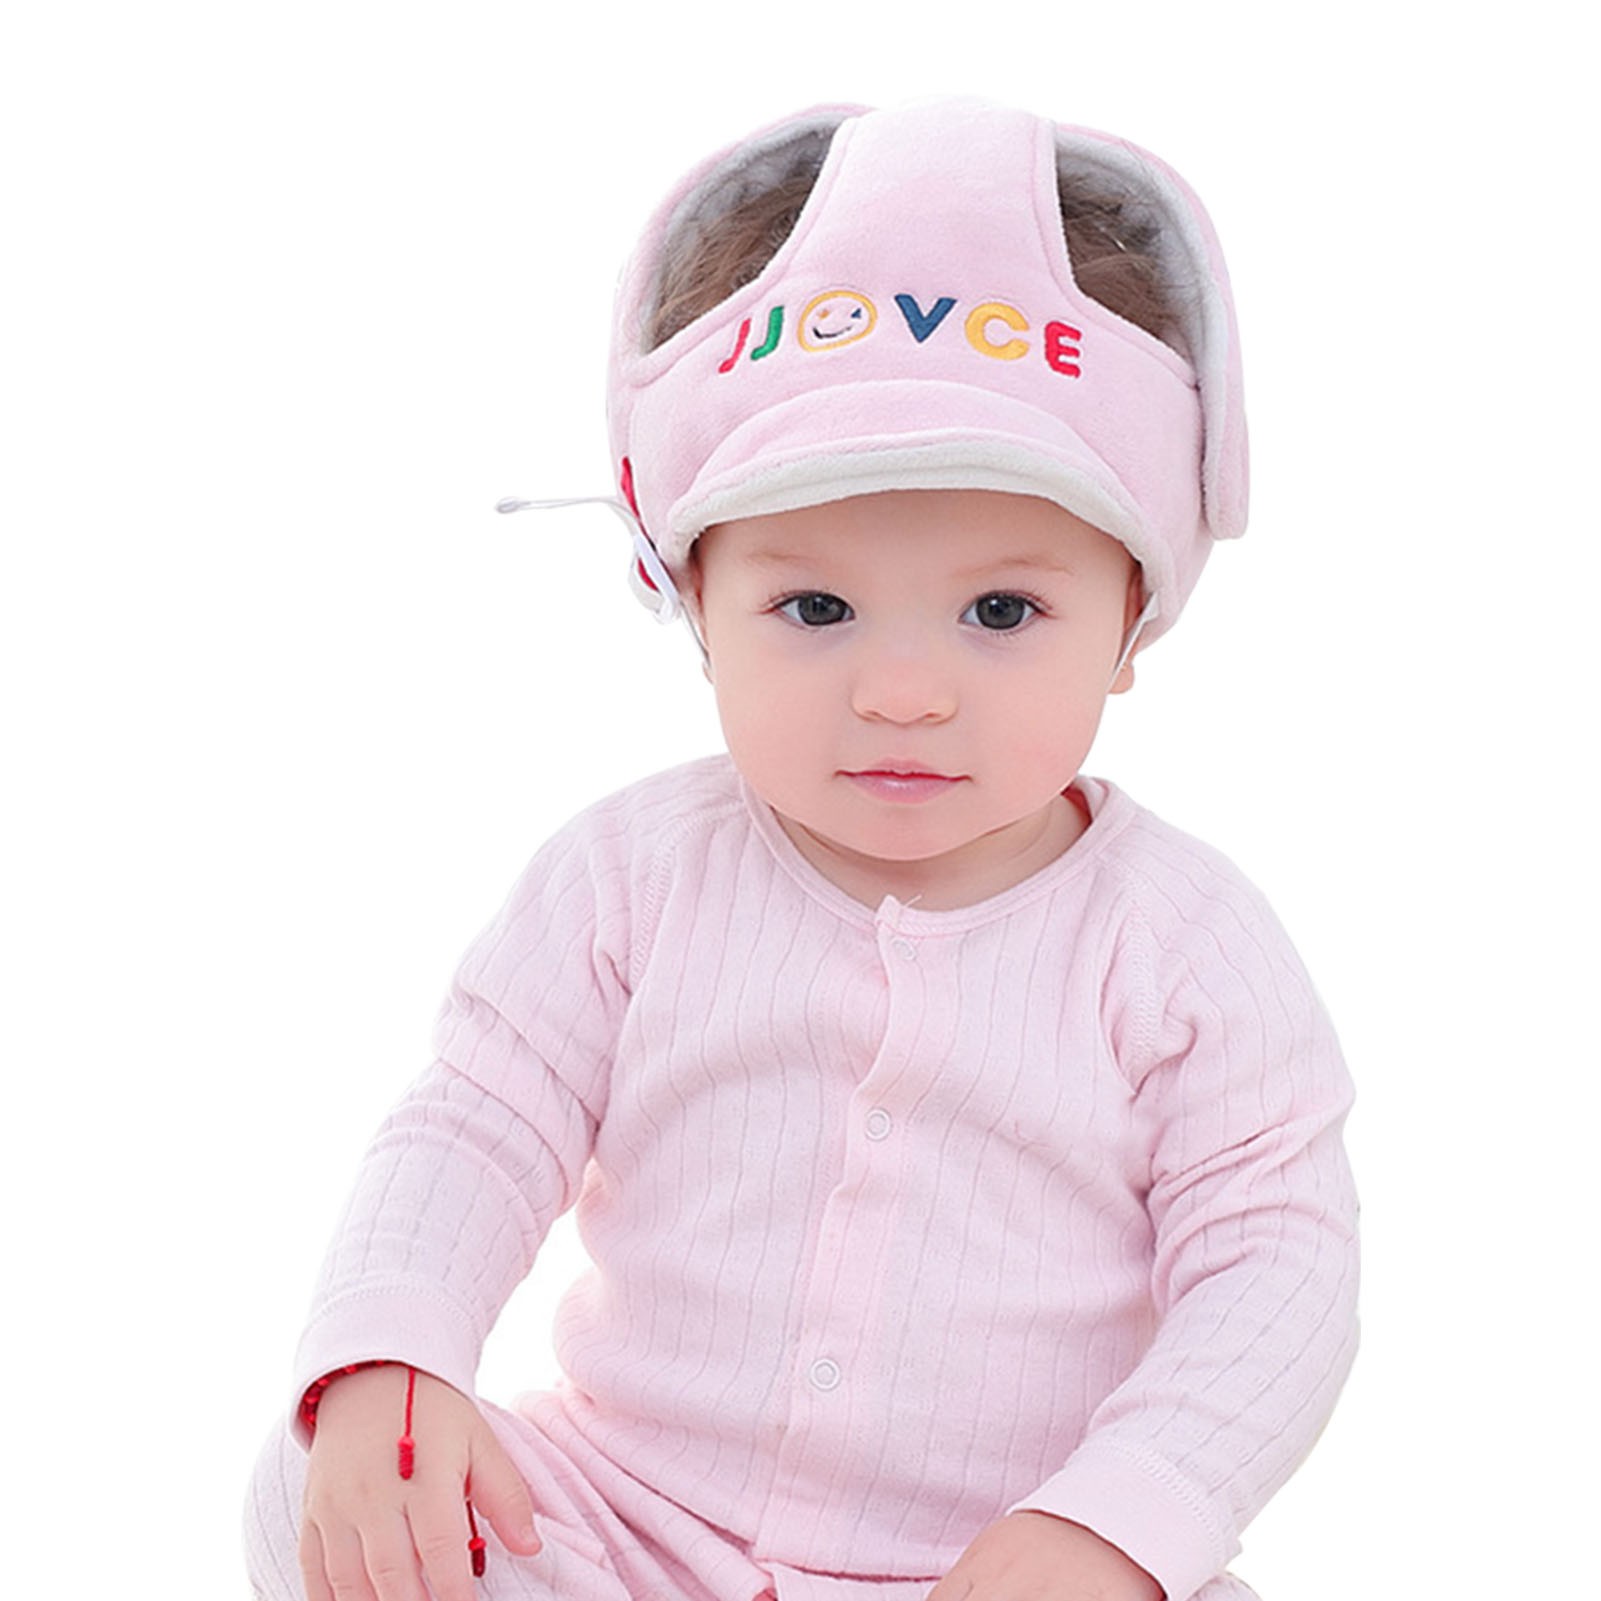 Boys Girls Protective Cap Soft Safety Helmet for Baby with Adjustable Strap Breathable Toddlers Infant Head Protector Anti-Crash